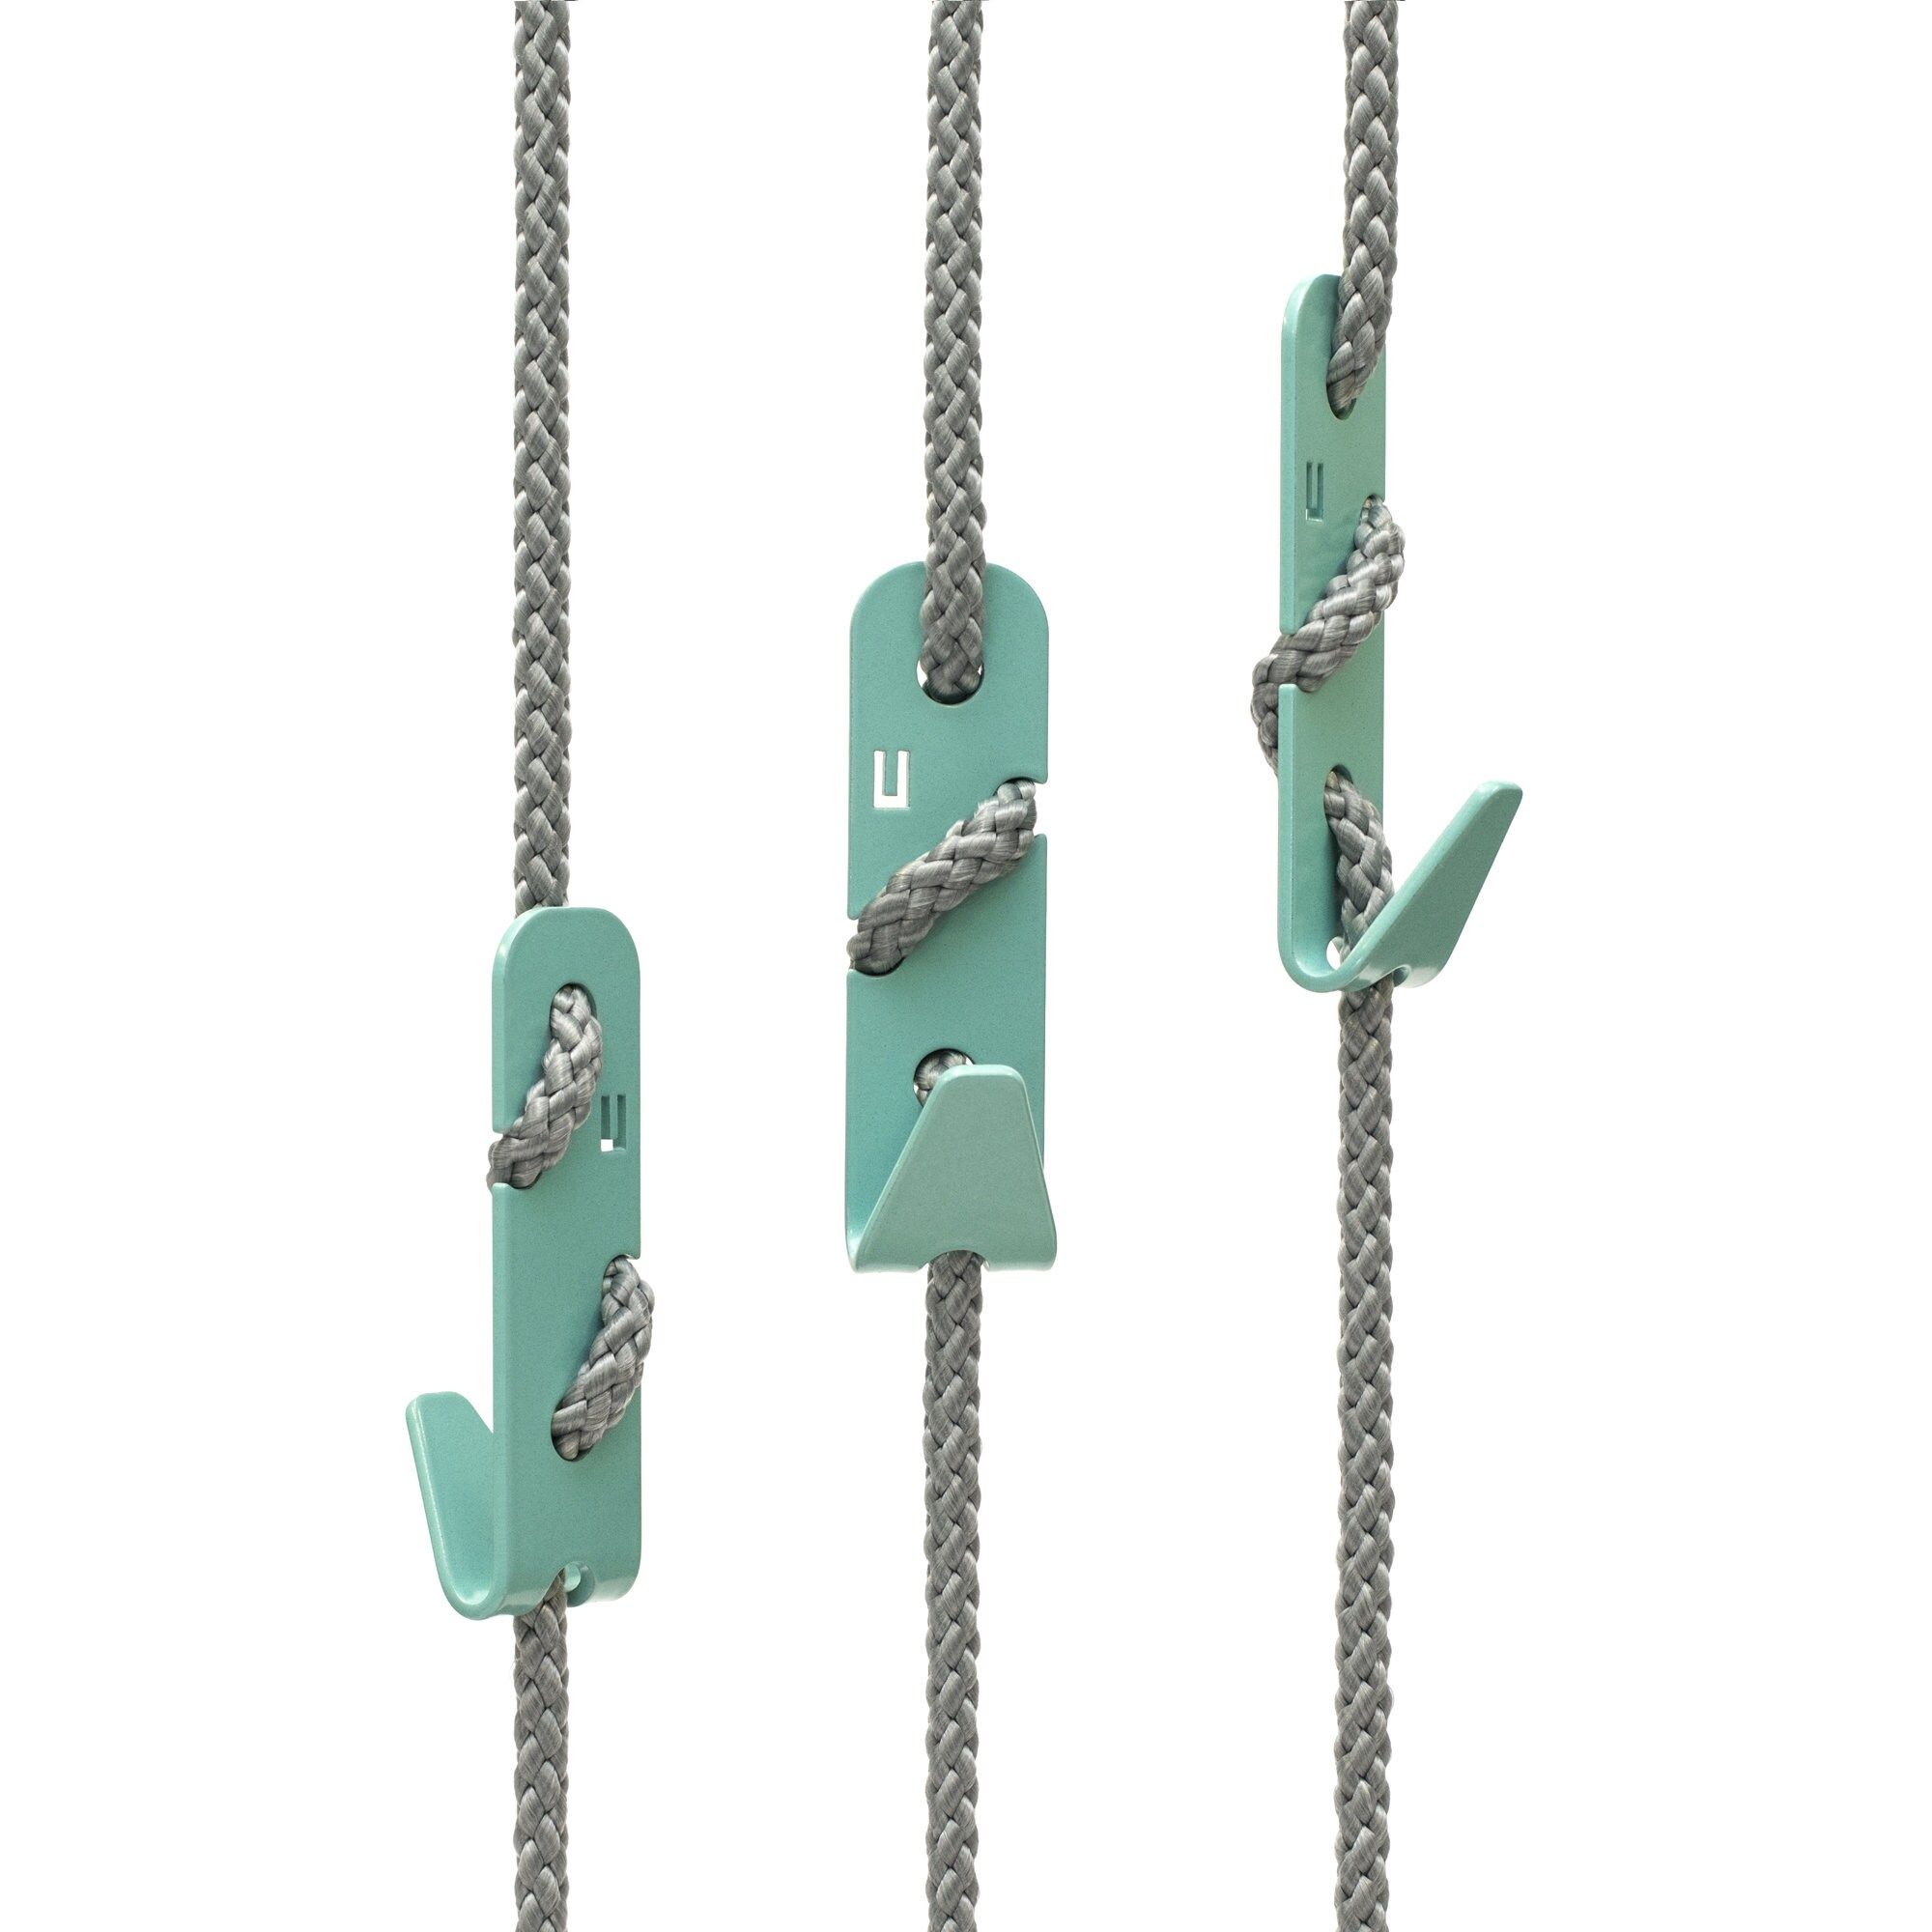 Wardrobe Hooks Maximize Space and Organization with Creative Clothing Hanging Solutions